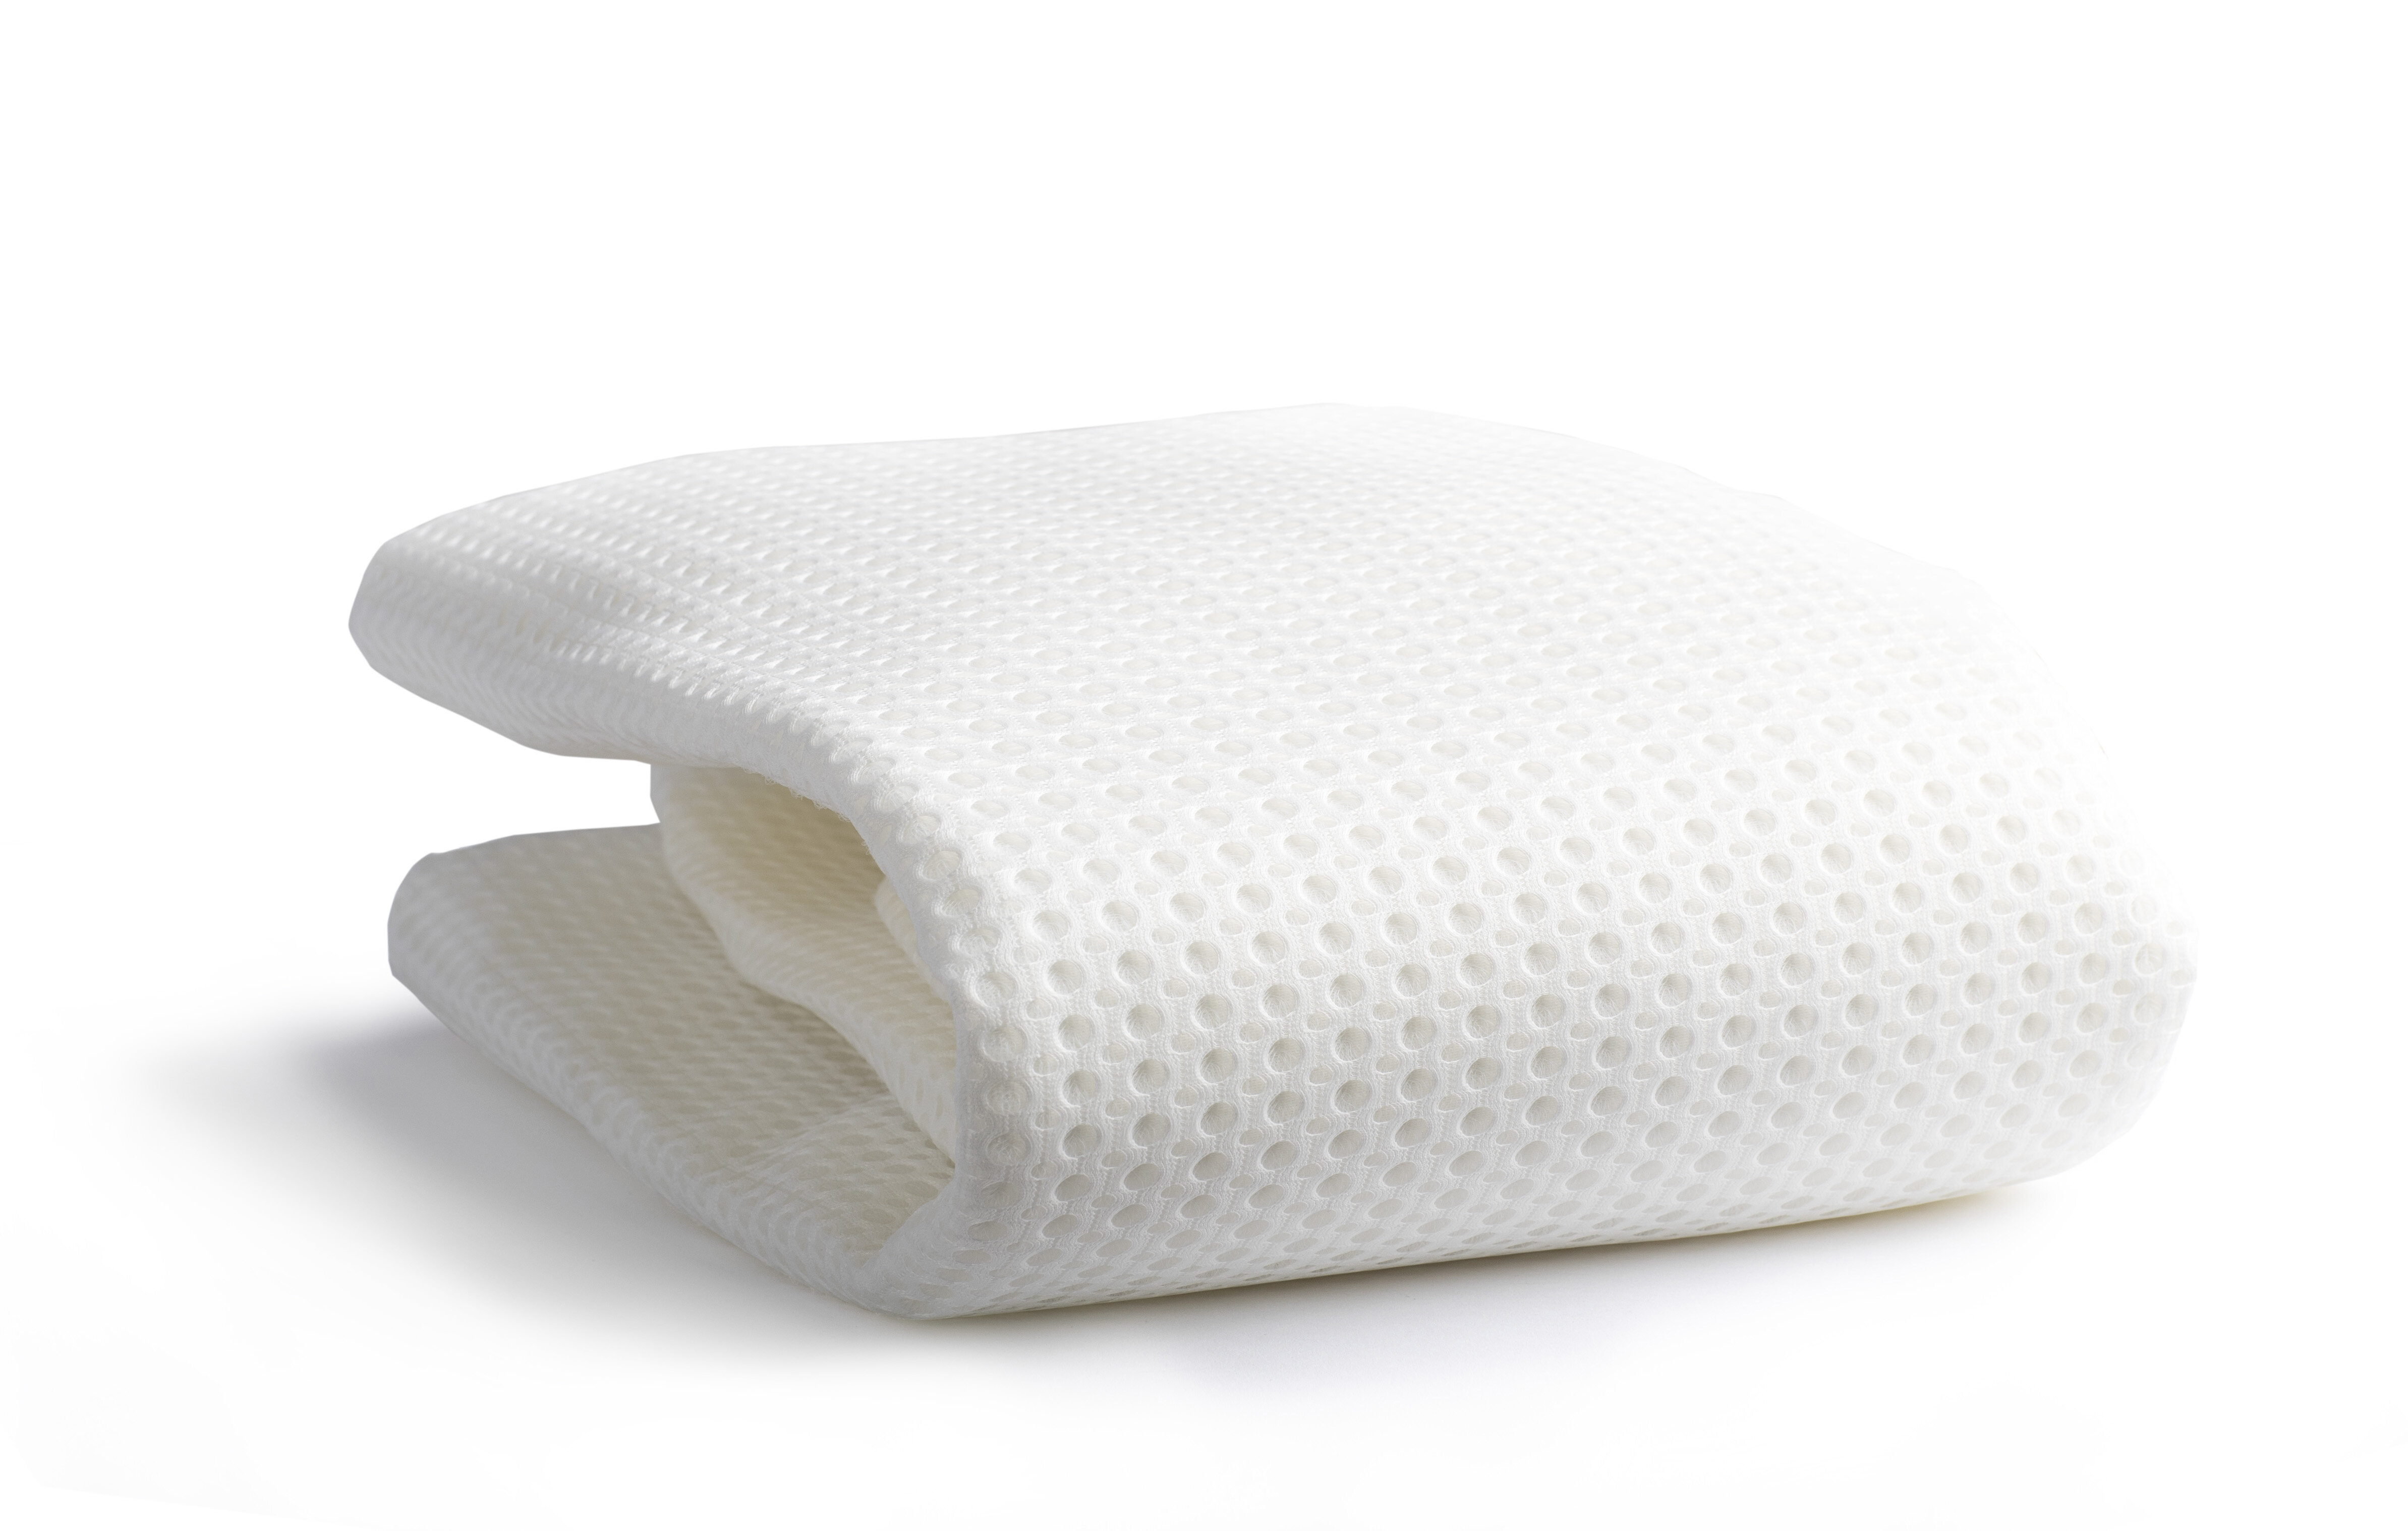 Breathing Easier: The Benefits of a Breathable Mattress for Your Baby